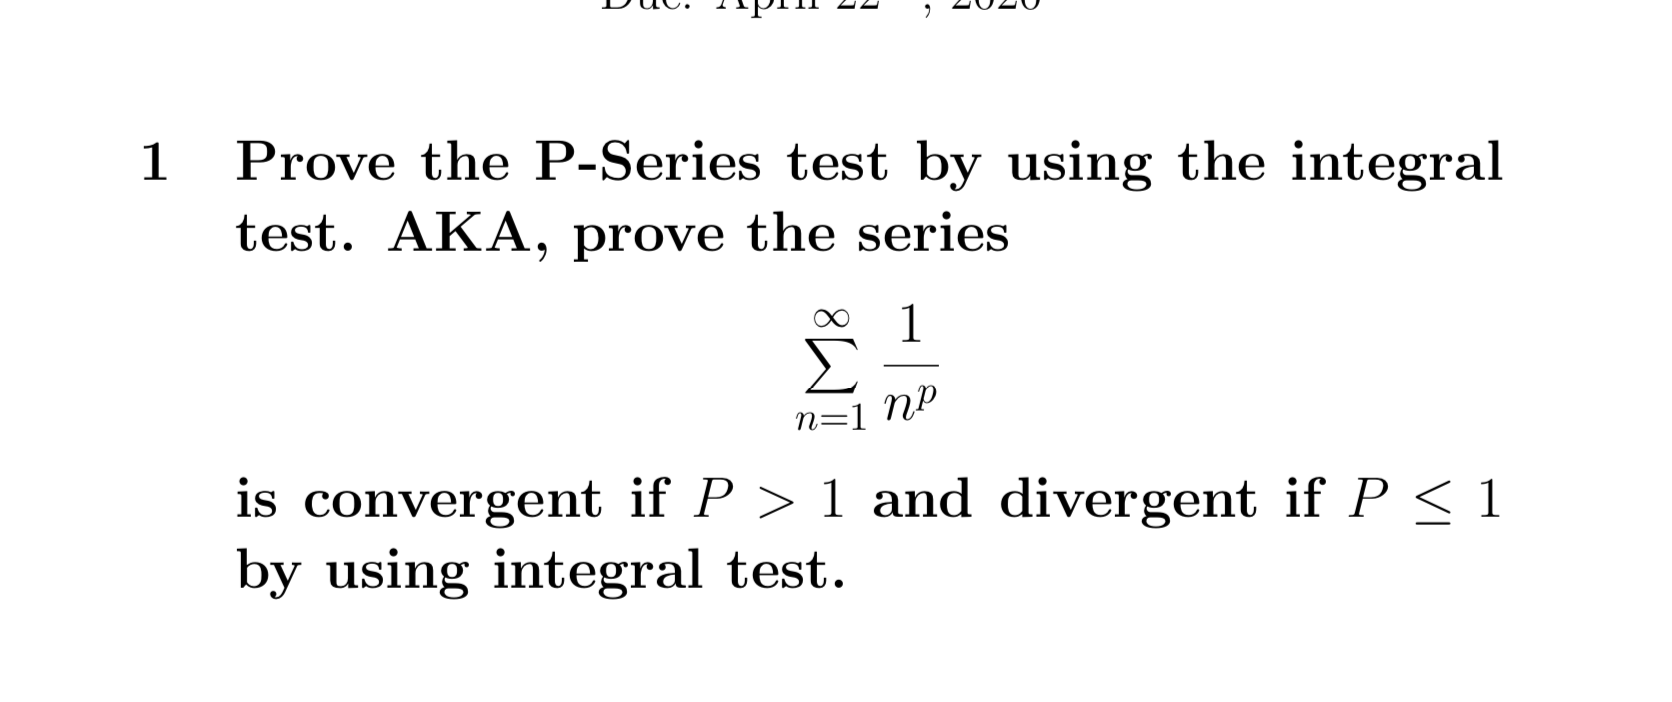 1
Prove the P-Series test by using the integral
test. AKA, prove the series
Σ
n=1 NP
is convergent if P > 1 and divergent if P < 1
by using integral test.
